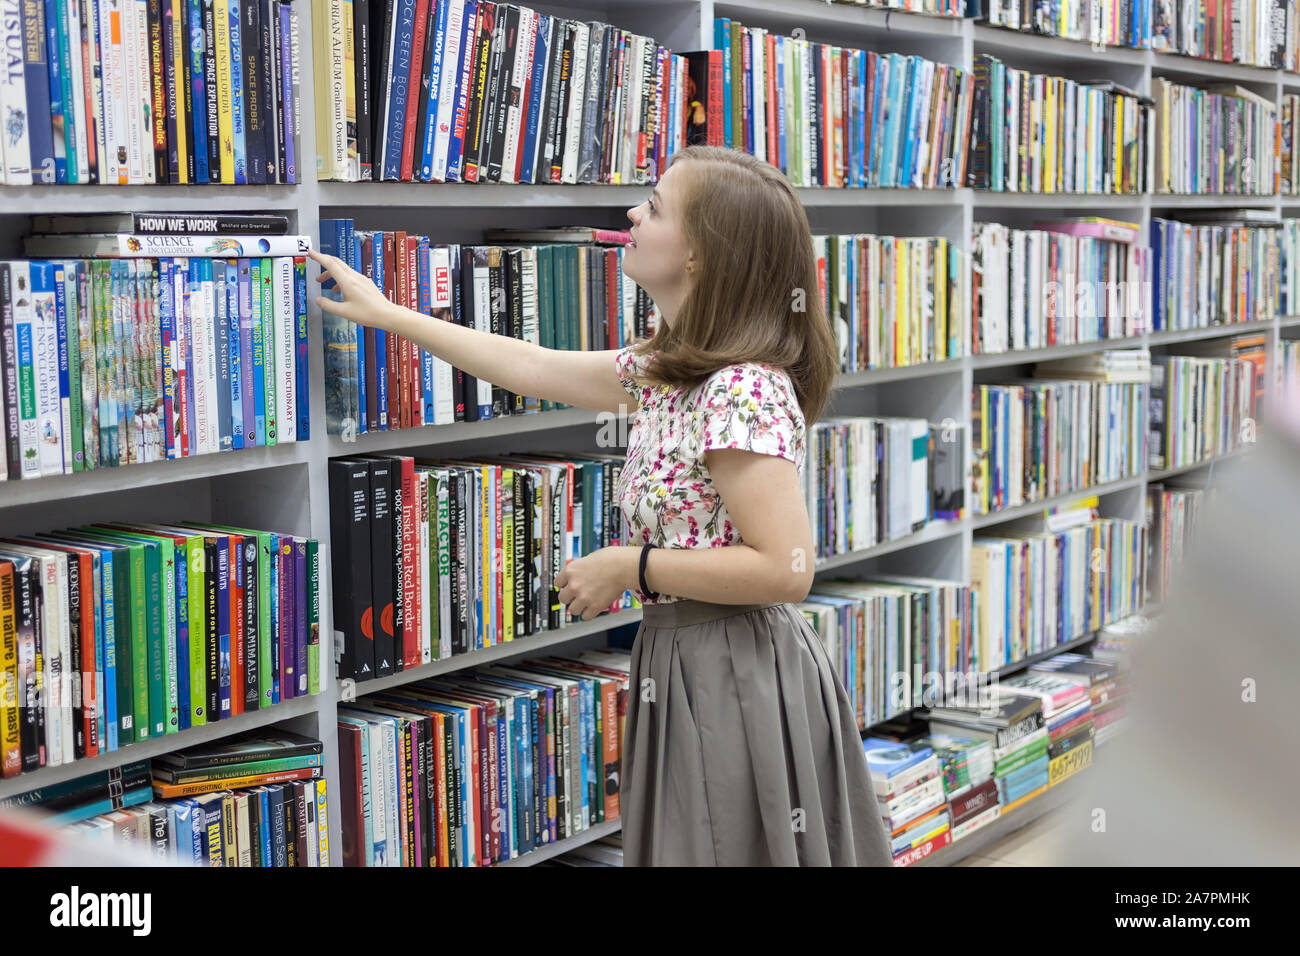 Manila, Philippines - June, 14, 2017: Smiling young caucasian woman girl choosing holding a book in library or bookstore Stock Photo